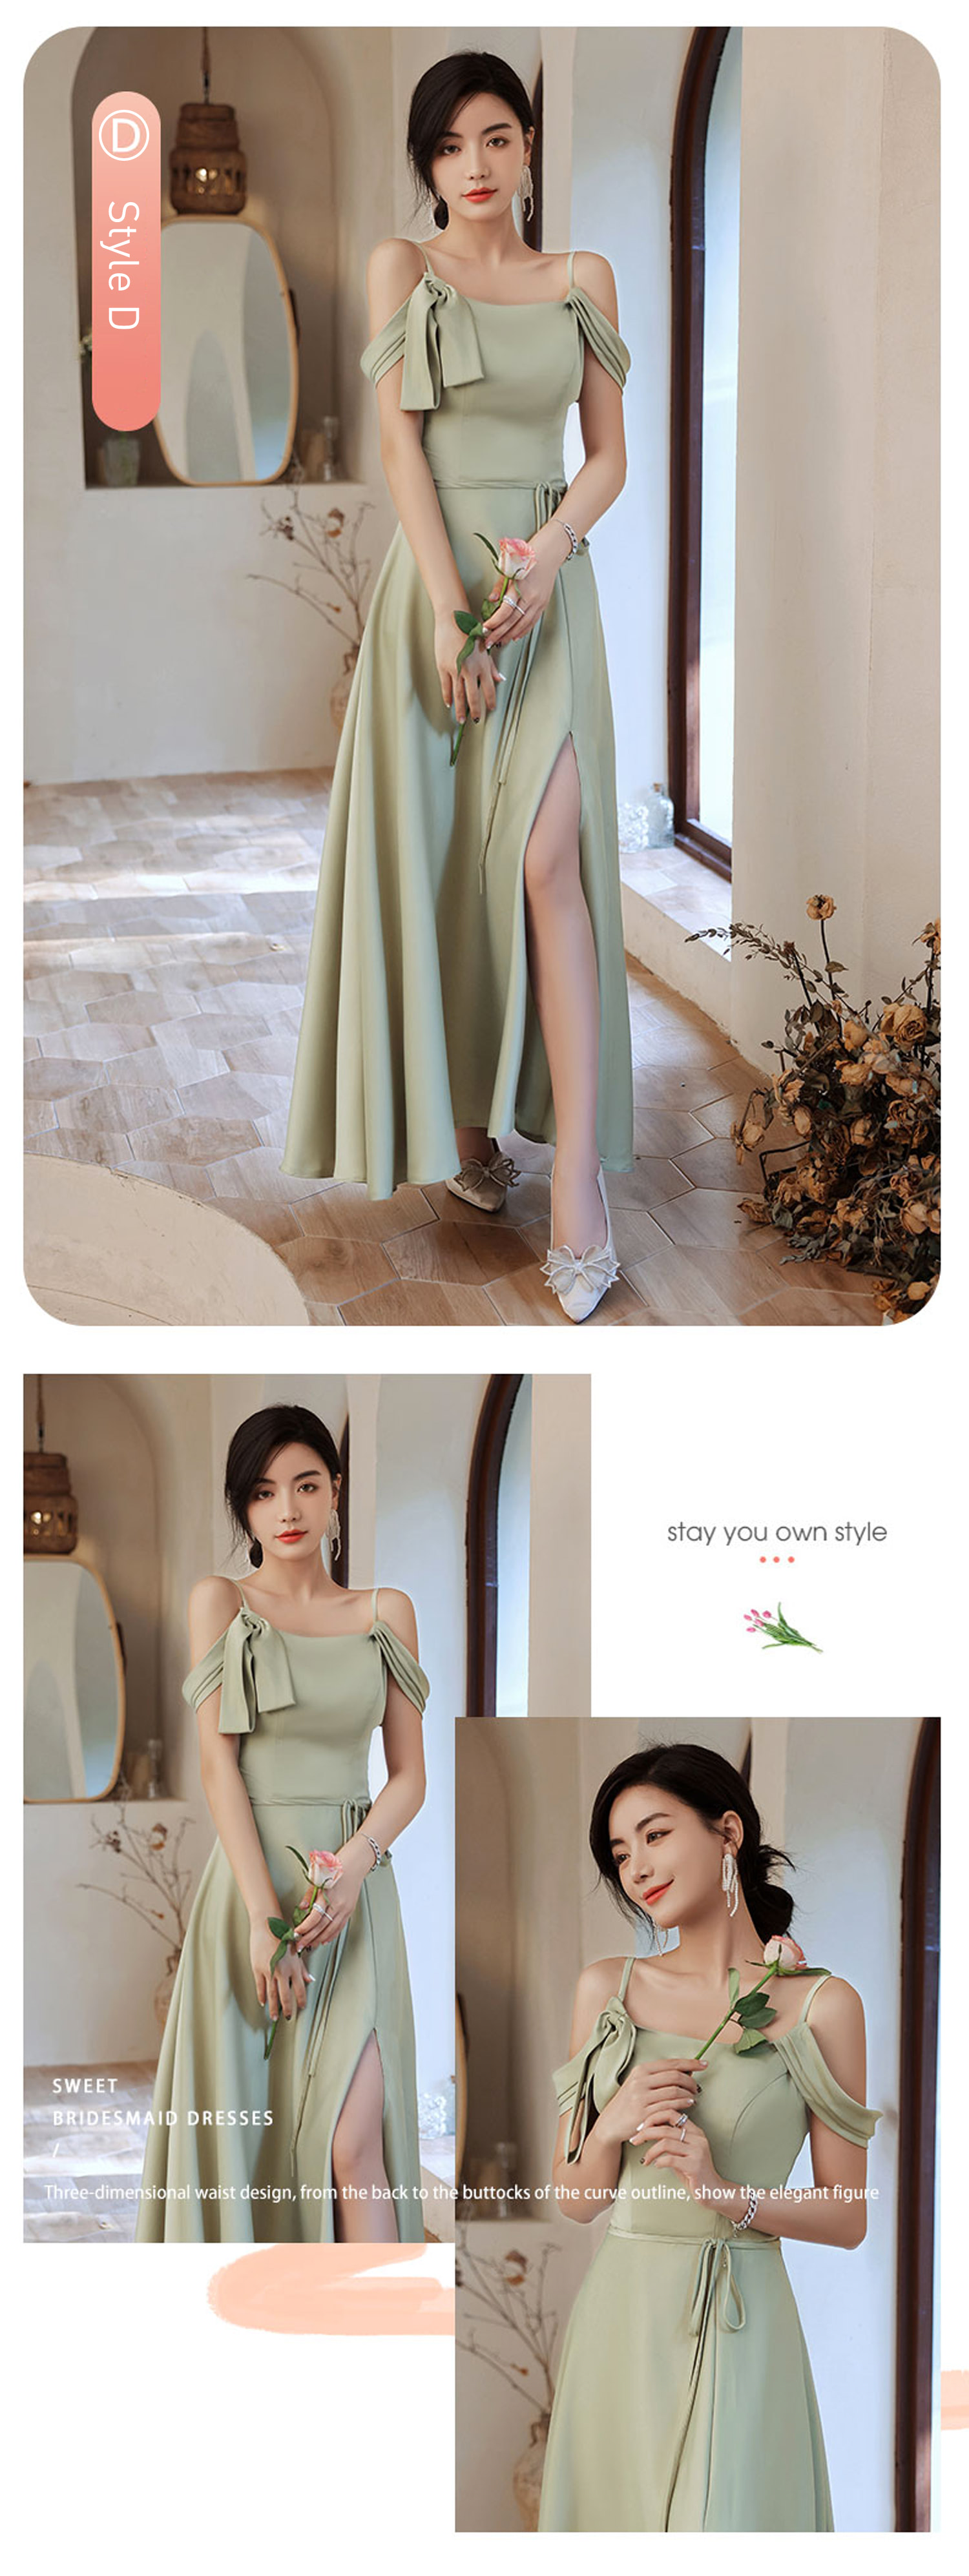 Simple-Olive-Green-Satin-Bridesmaid-Dress-Beach-Wedding-Guest-Outfit21